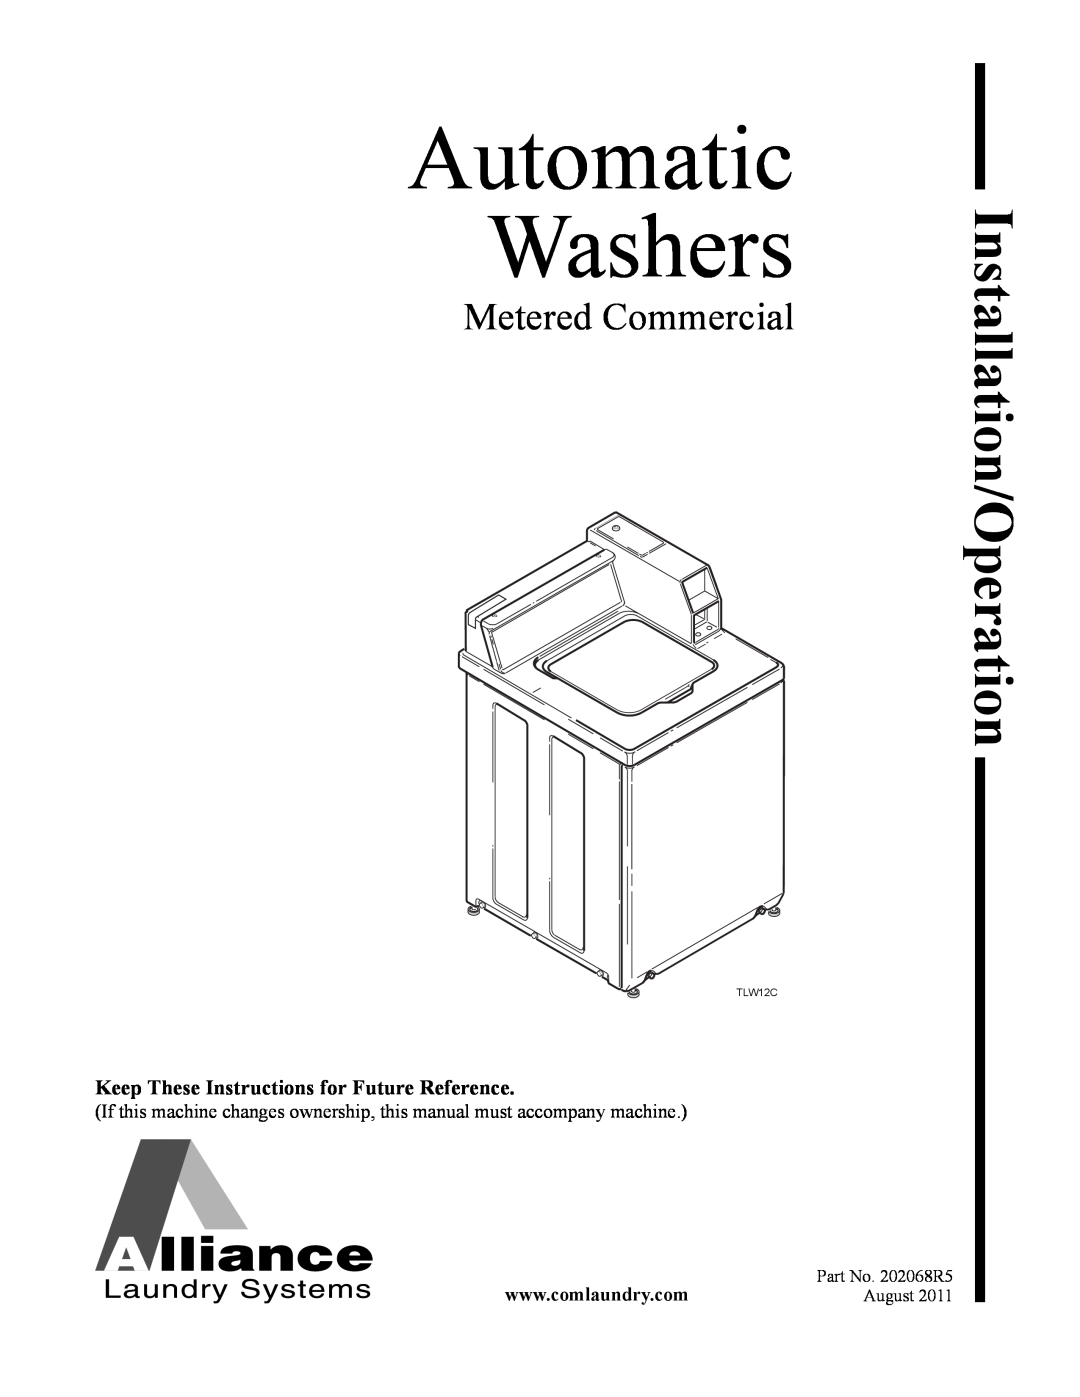 Alliance Laundry Systems TLW12CTLW12C manual Automatic Washers, Metered Commercial, Installation/Operation 